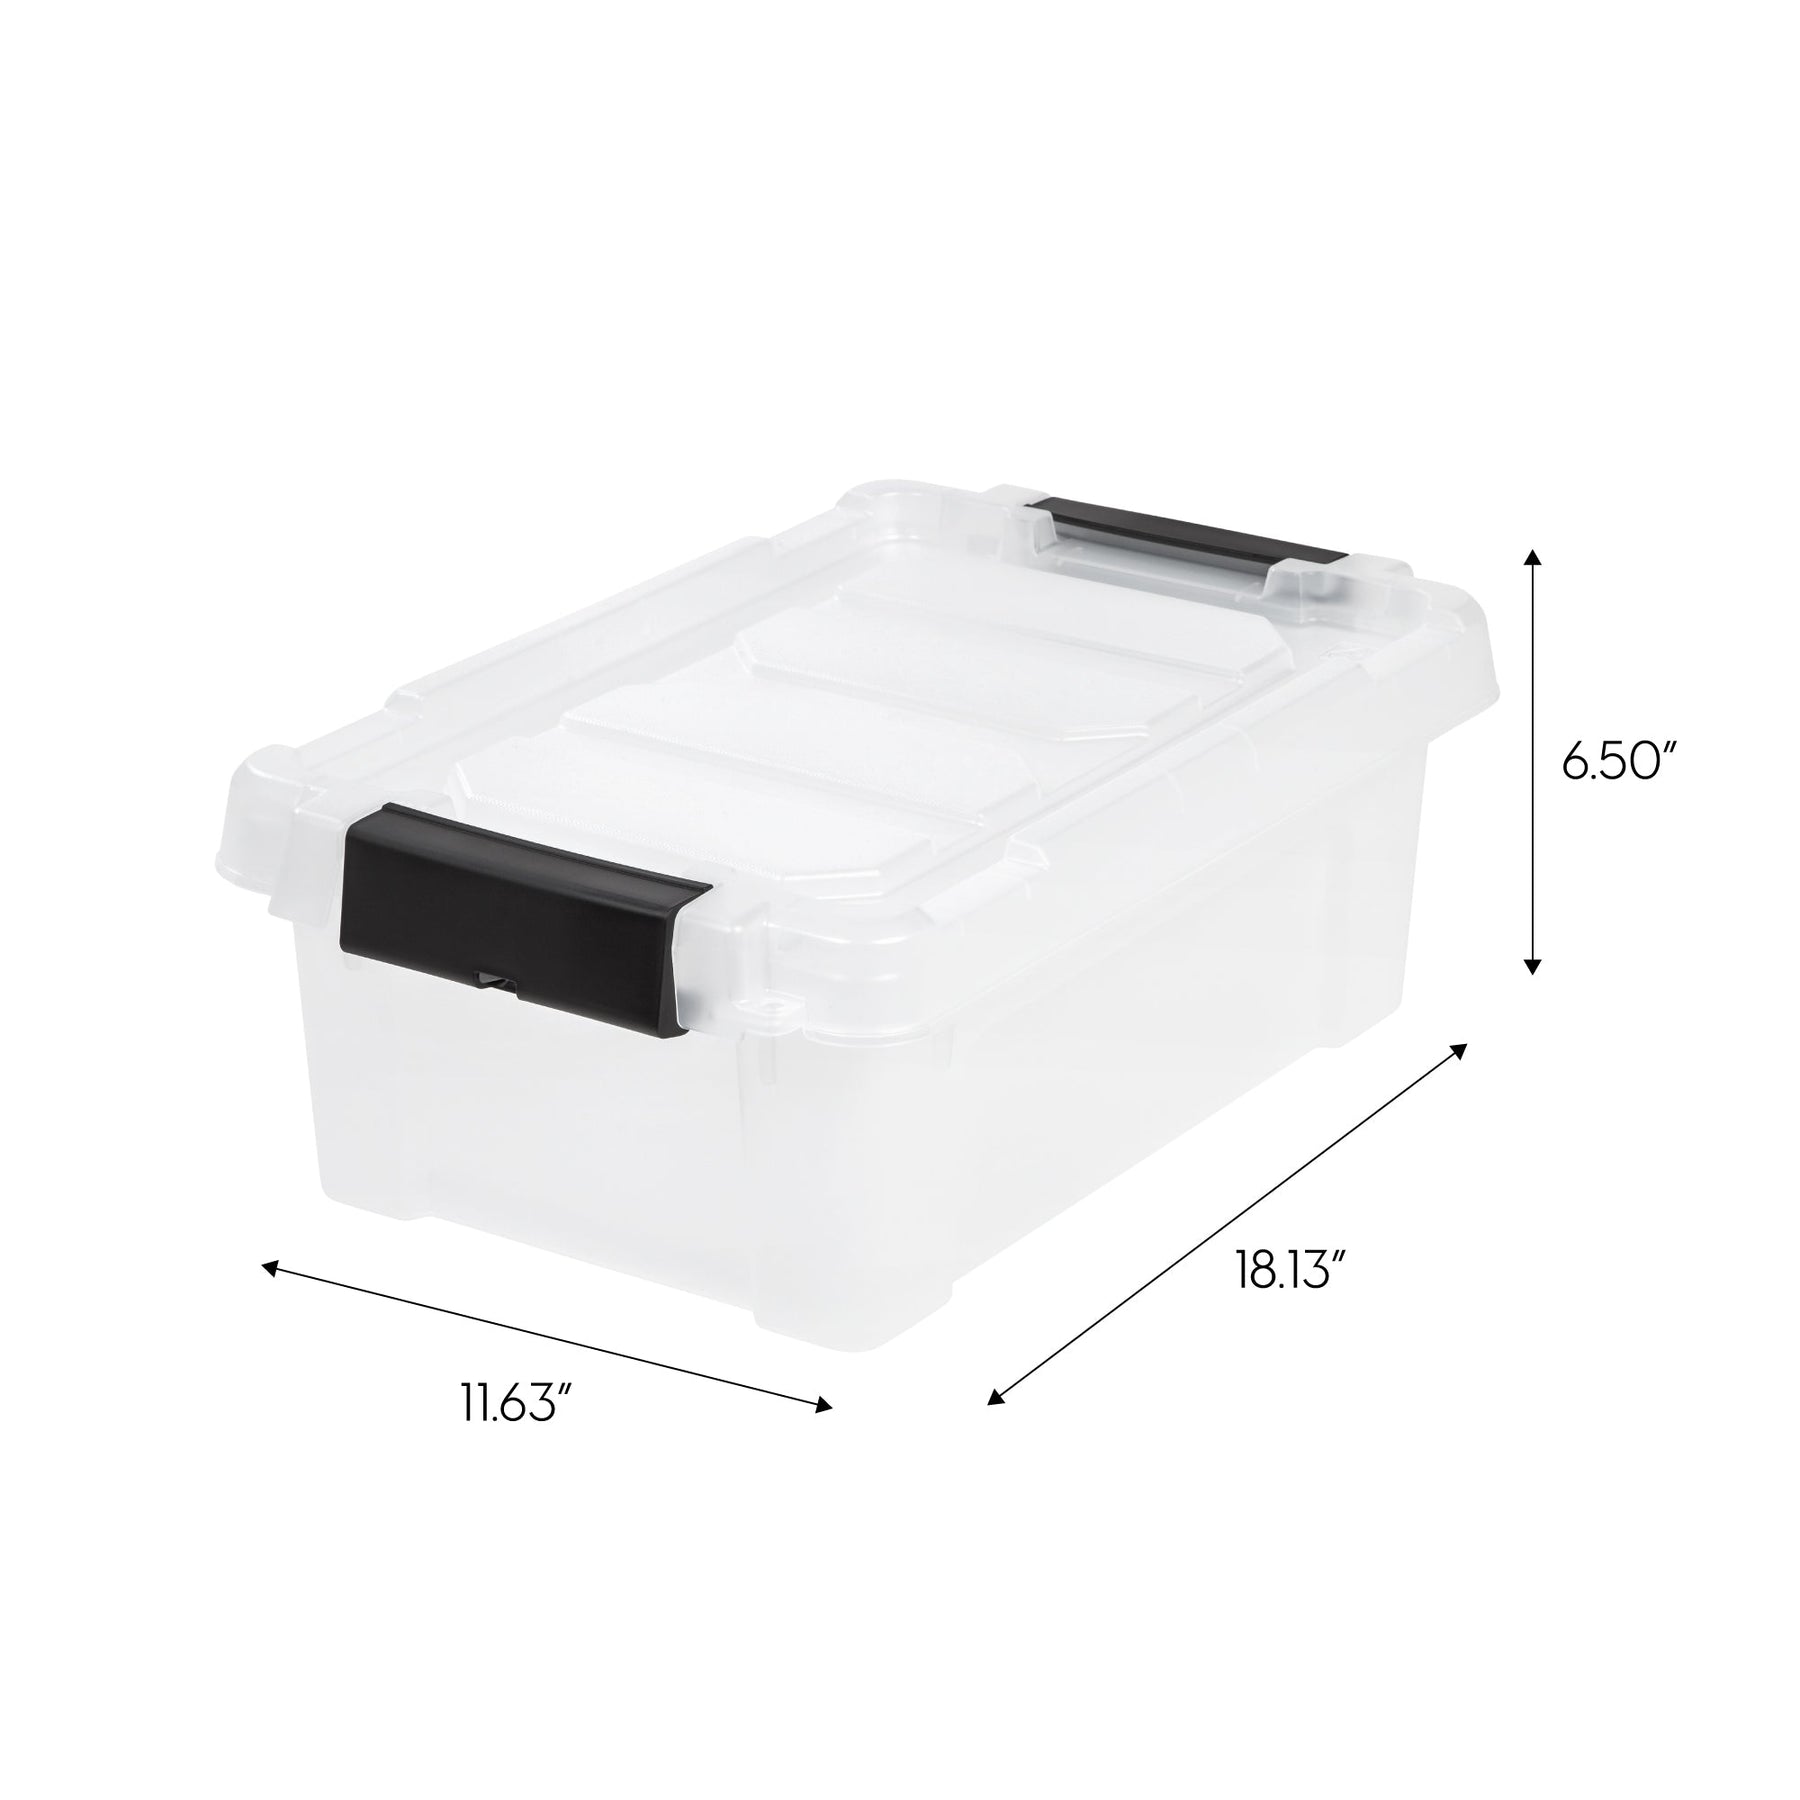 Iris 6.5 Gallon Clear Plastic Storage Boxes with Blue Lid, Pack of 4